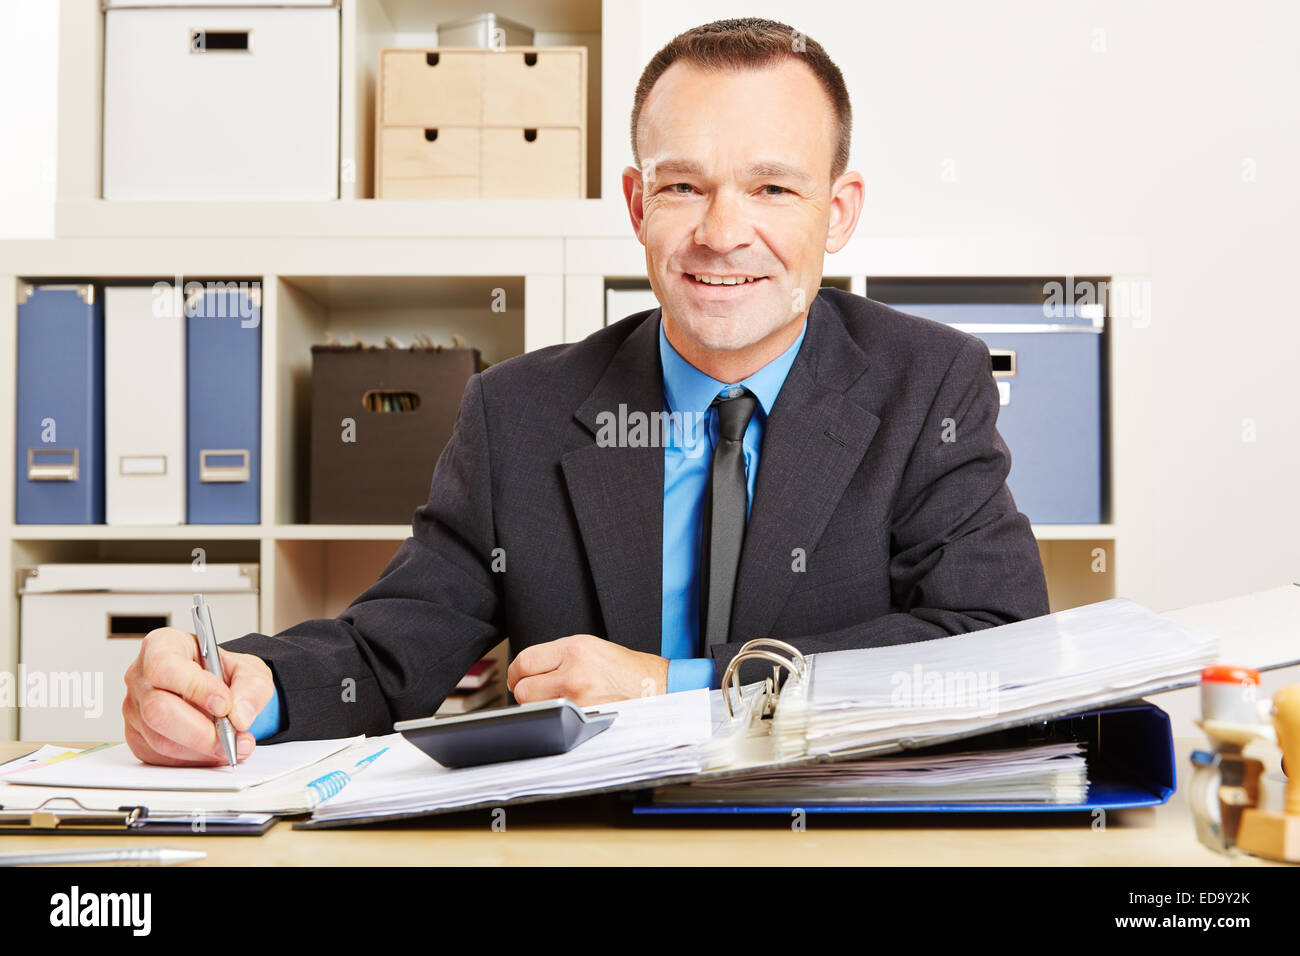 Finance clerk sitting at his desk with files and a calculator Stock Photo